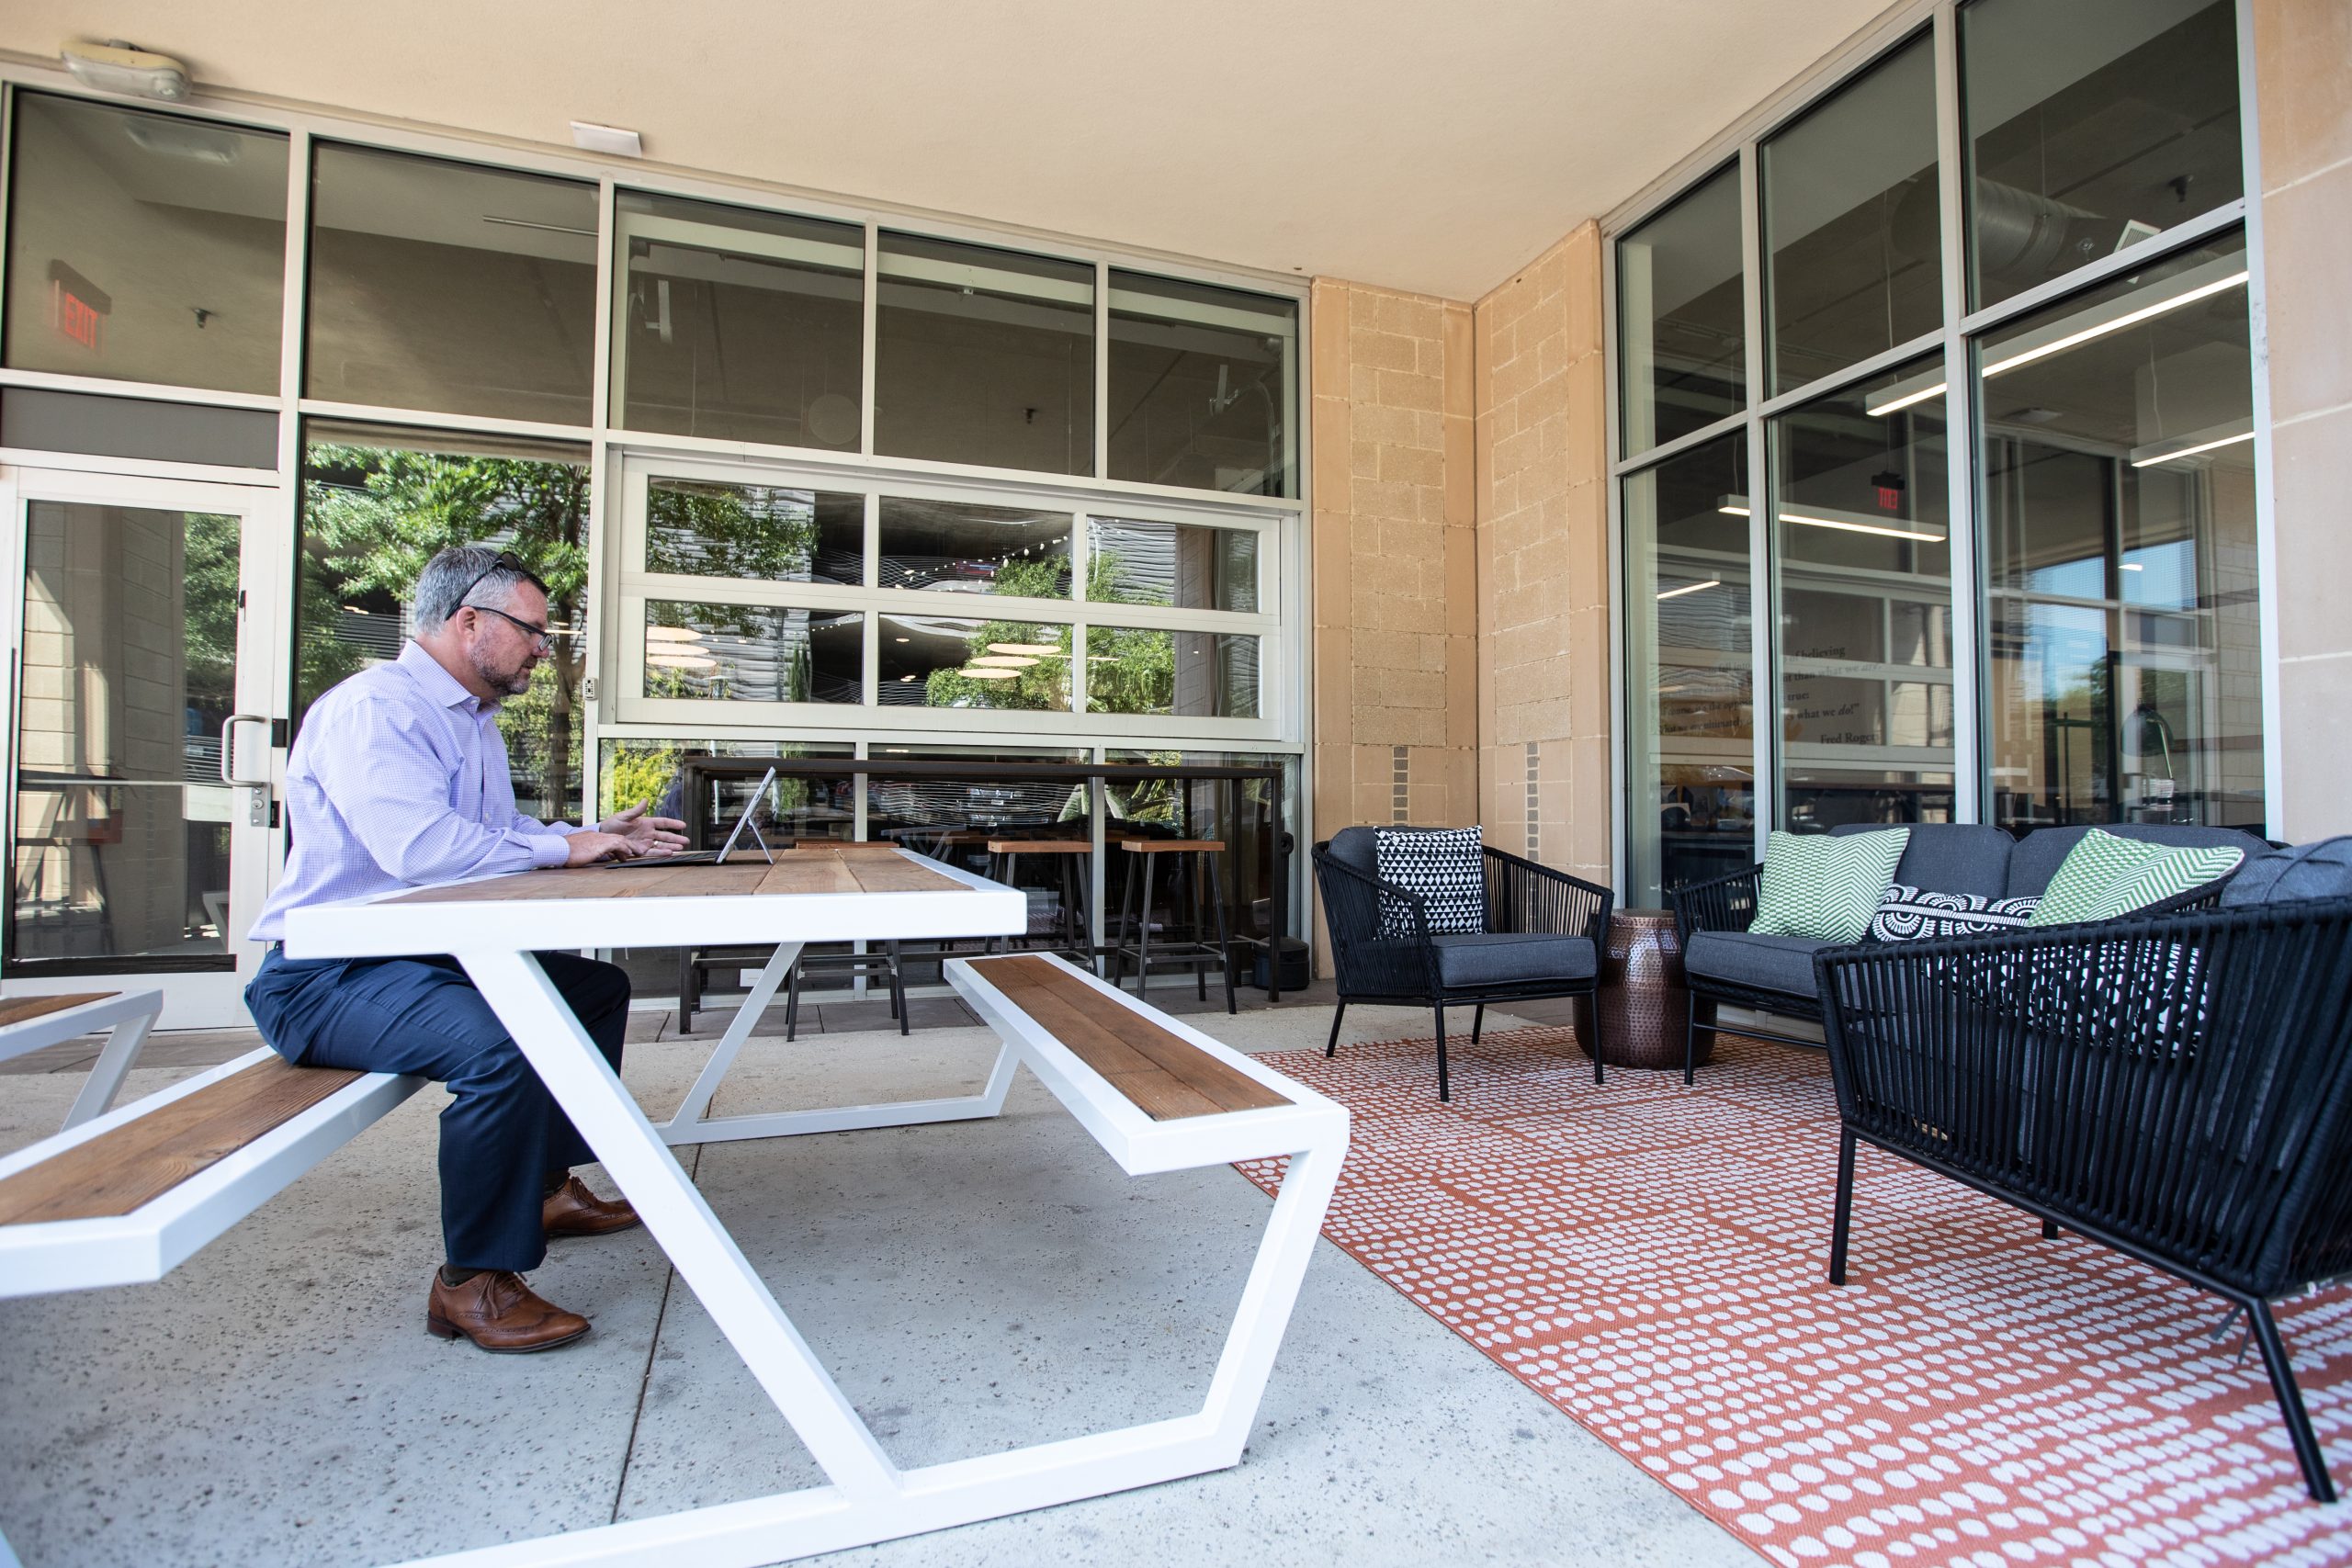 Outdoor patio and workspace